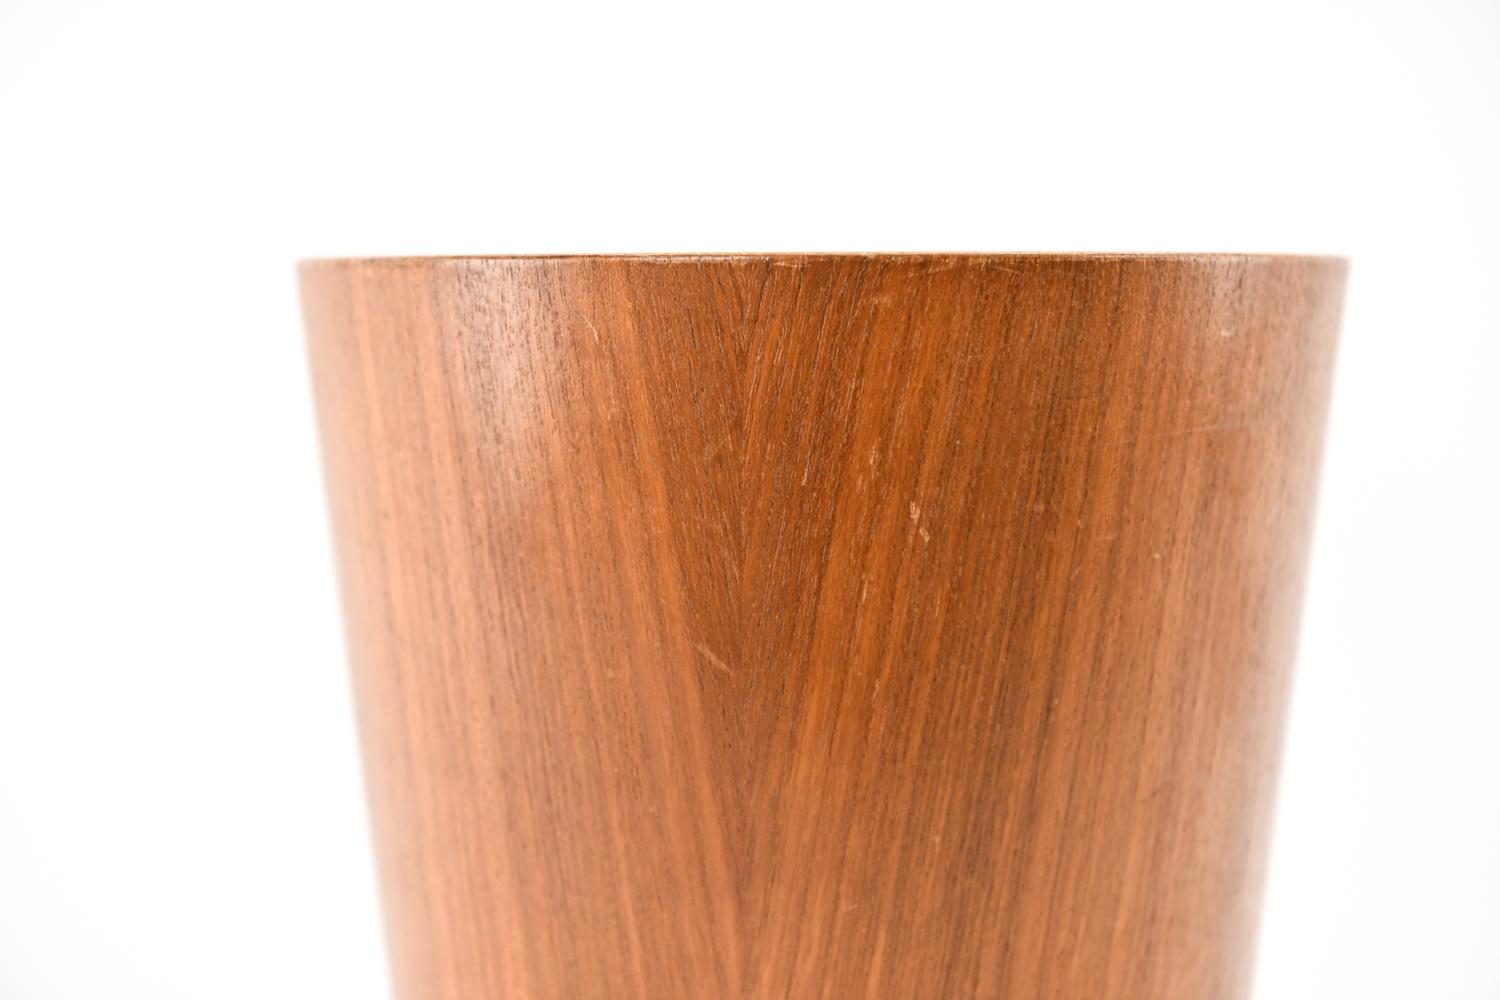 A midcentury teak waste basket or paper bin designed by Martin Aberg for Servex/House of Rainbow Wood Products, Sweden, circa 1950s-1960s. A simple, clean modern round form.